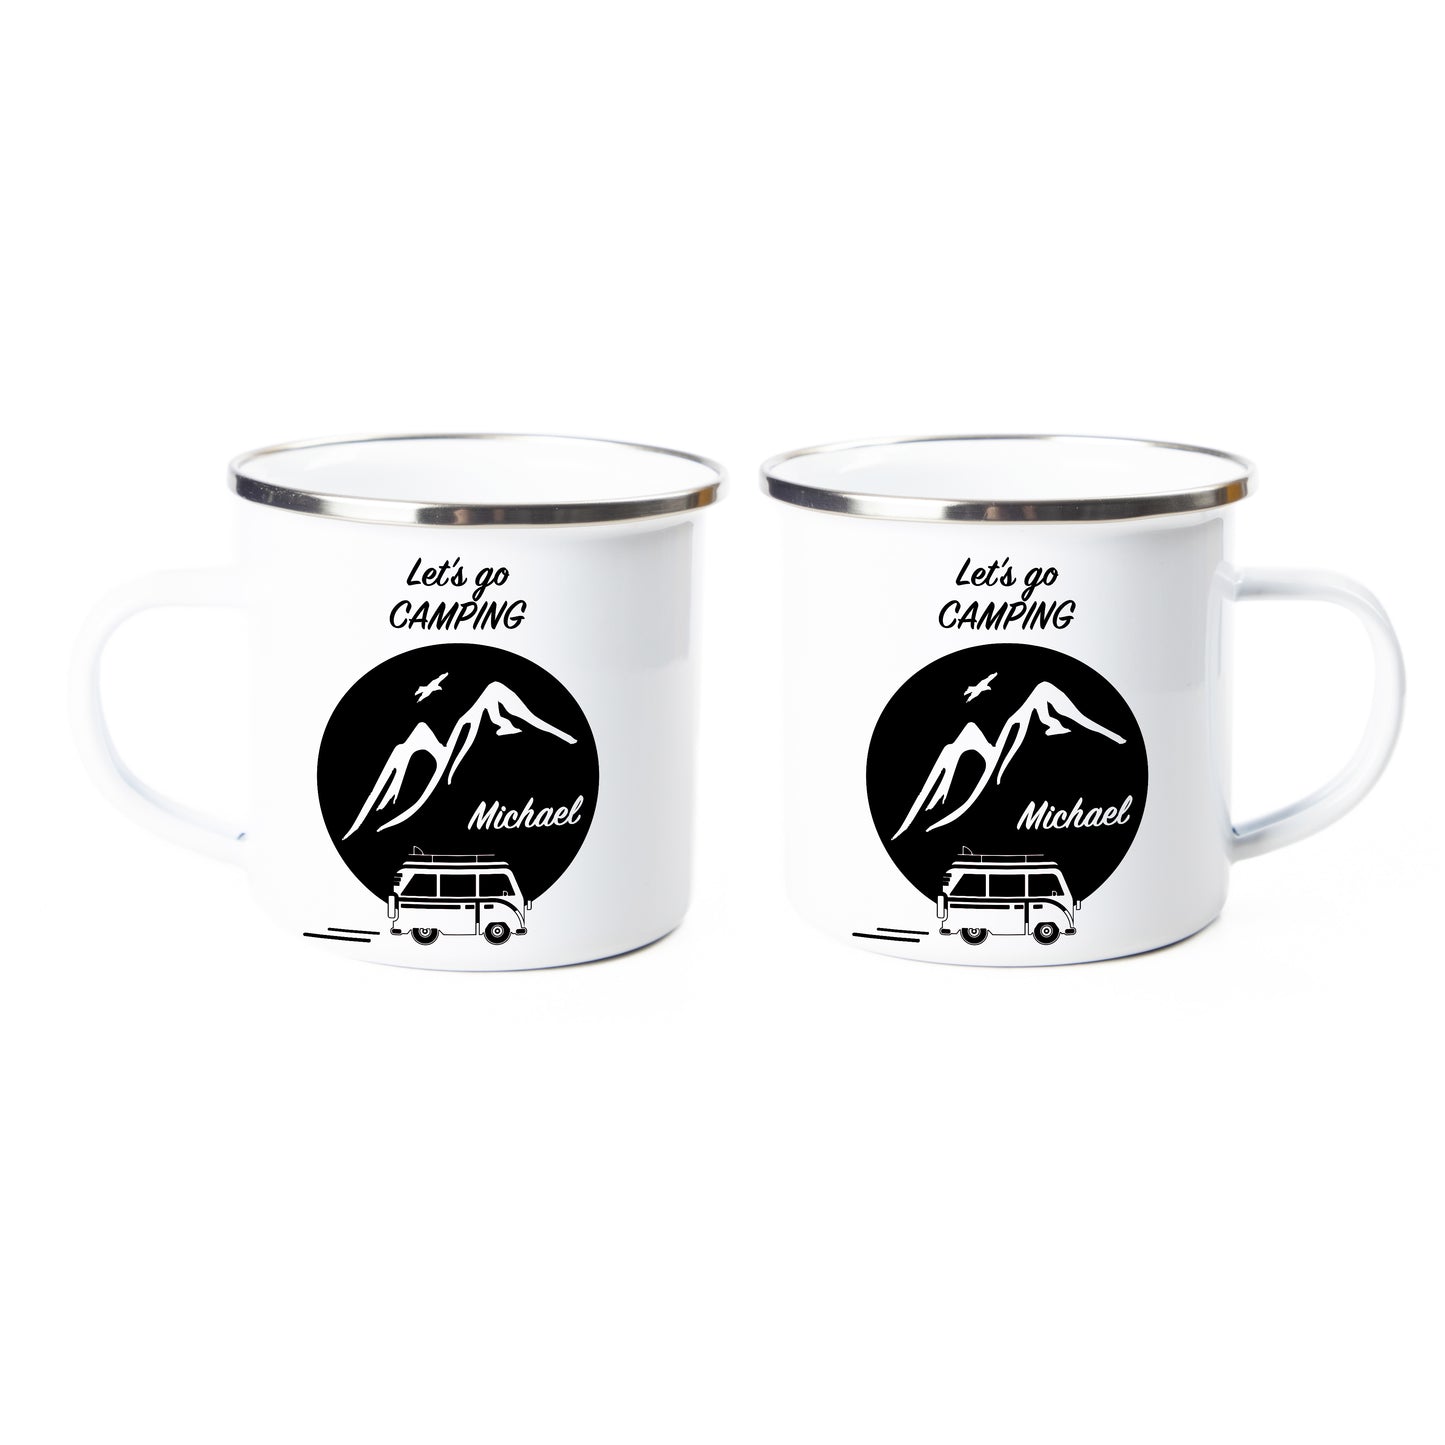 Tasse - Let's go camping - personalisiert - Emaille (Silber)